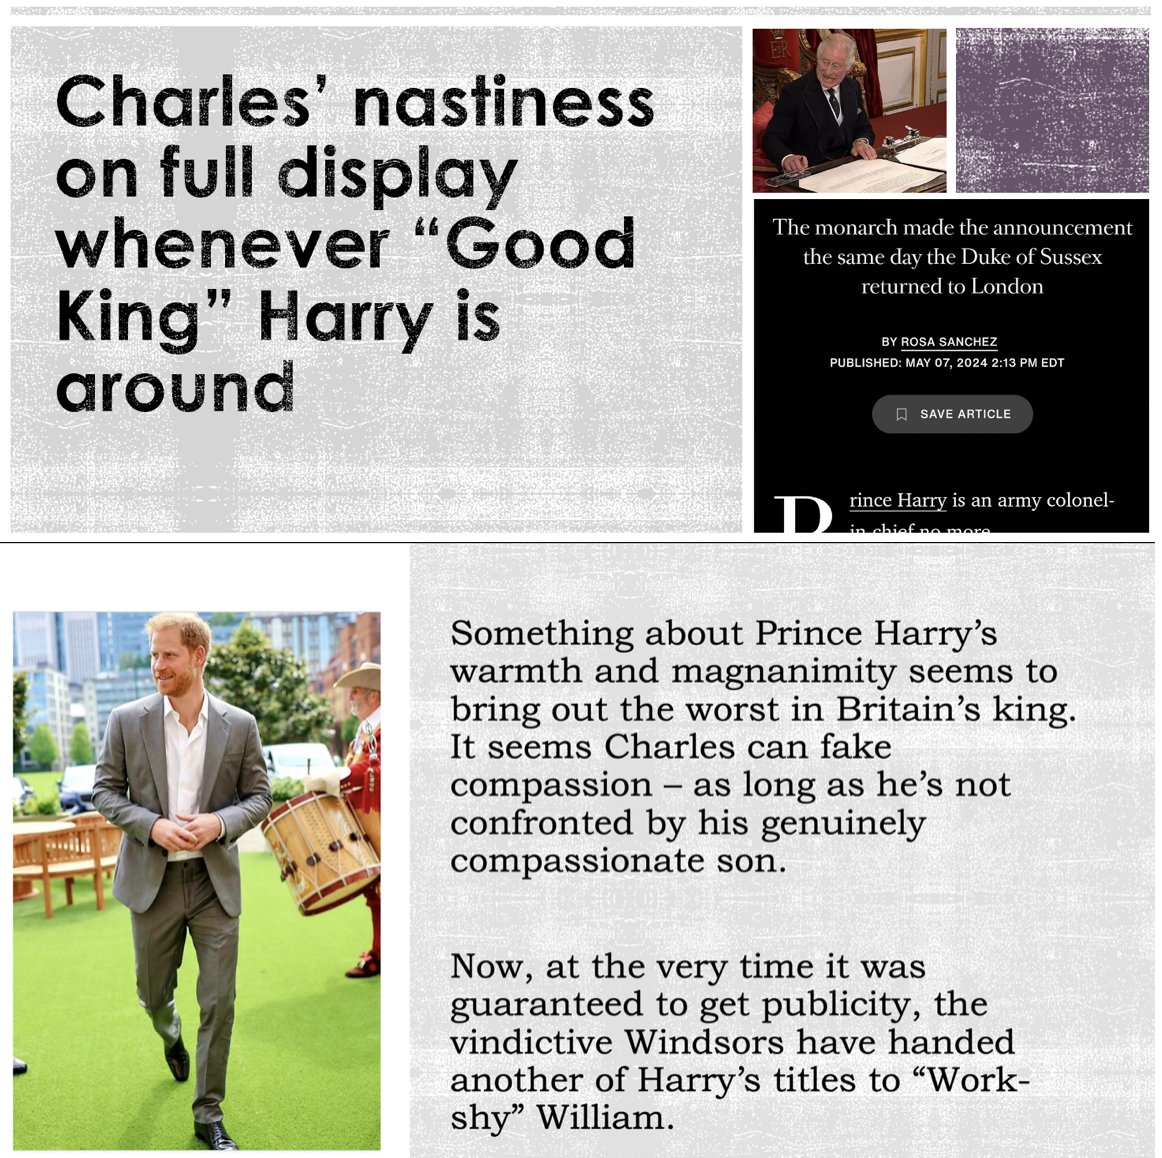 Prince Harry's father keeps living down to his #KingCharlesTheCruel nick-name.

#GoodKingHarry #PrinceHarry #PrinceHarryandMeghan #Invictus #RoyalFamily #ThatFamily #KingCharles #ServiceIsUniversal 

Time for 'sick' royals to stop their twisted games
unpacked4.wordpress.com/2024/05/06/its…